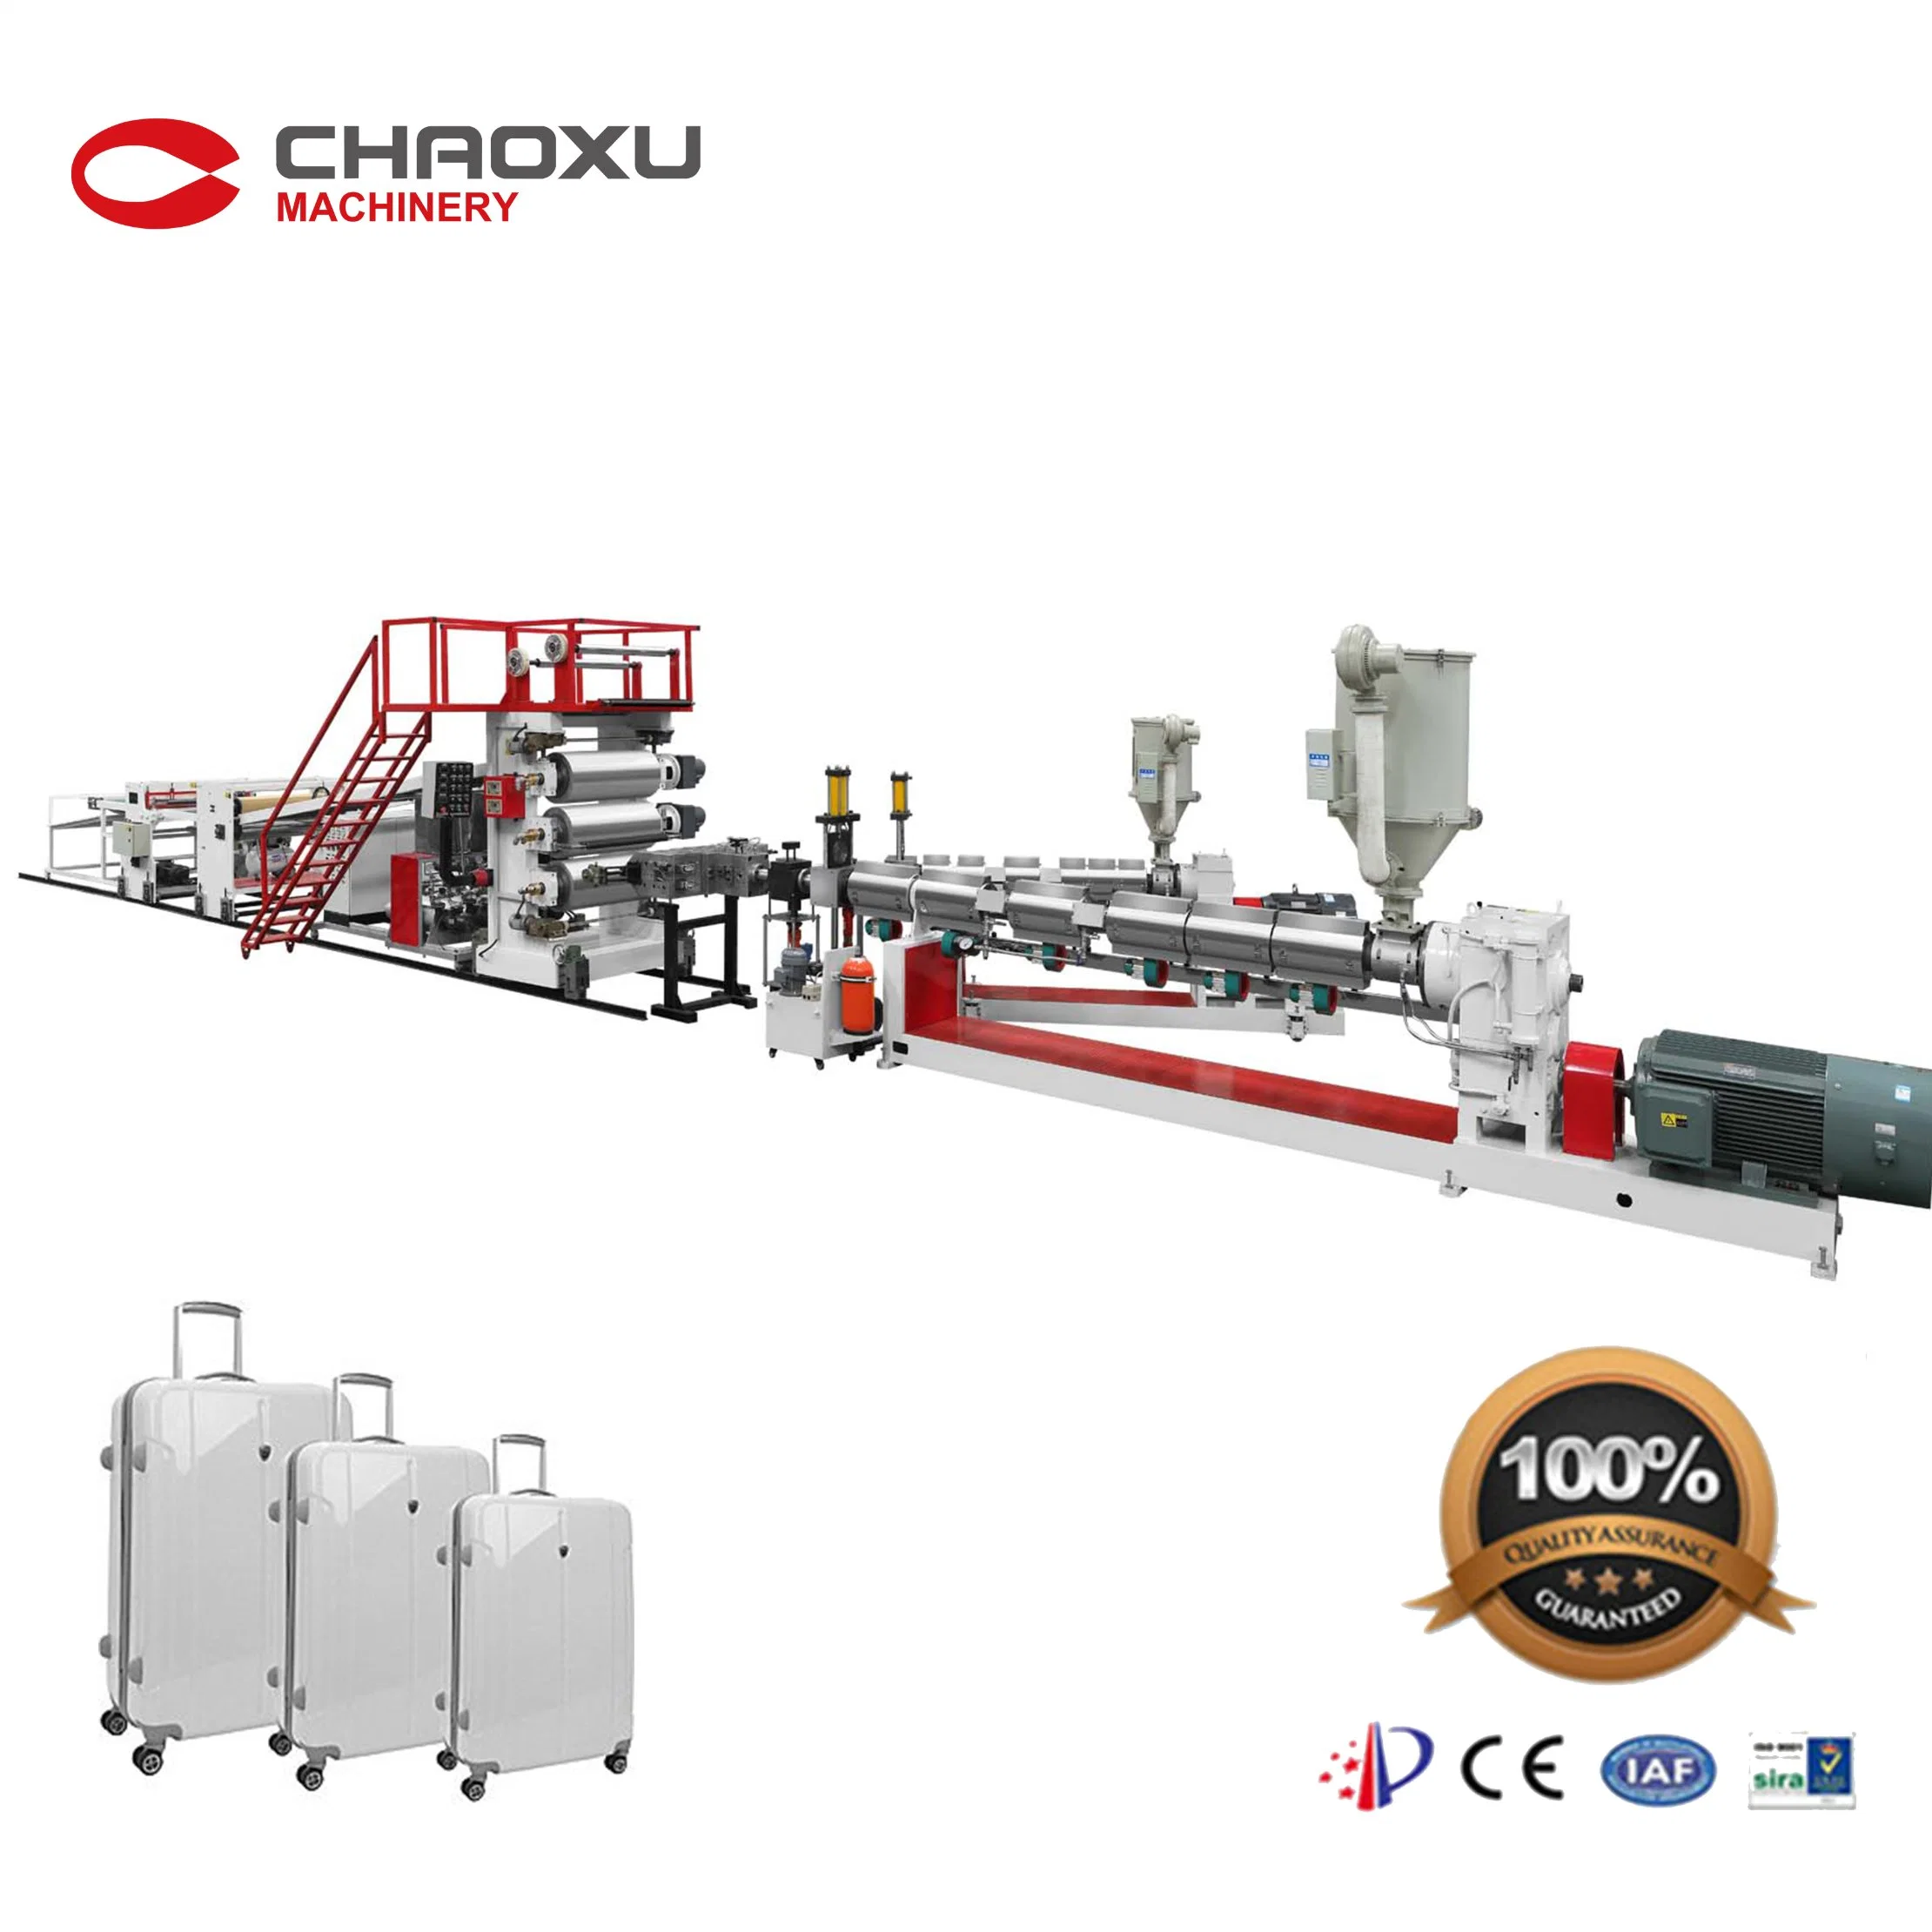 Chaoxu ABS PC Plastic Sheet Luggage Twin Screw Extruder Making Machine/Suitcase Extrusion Production Line